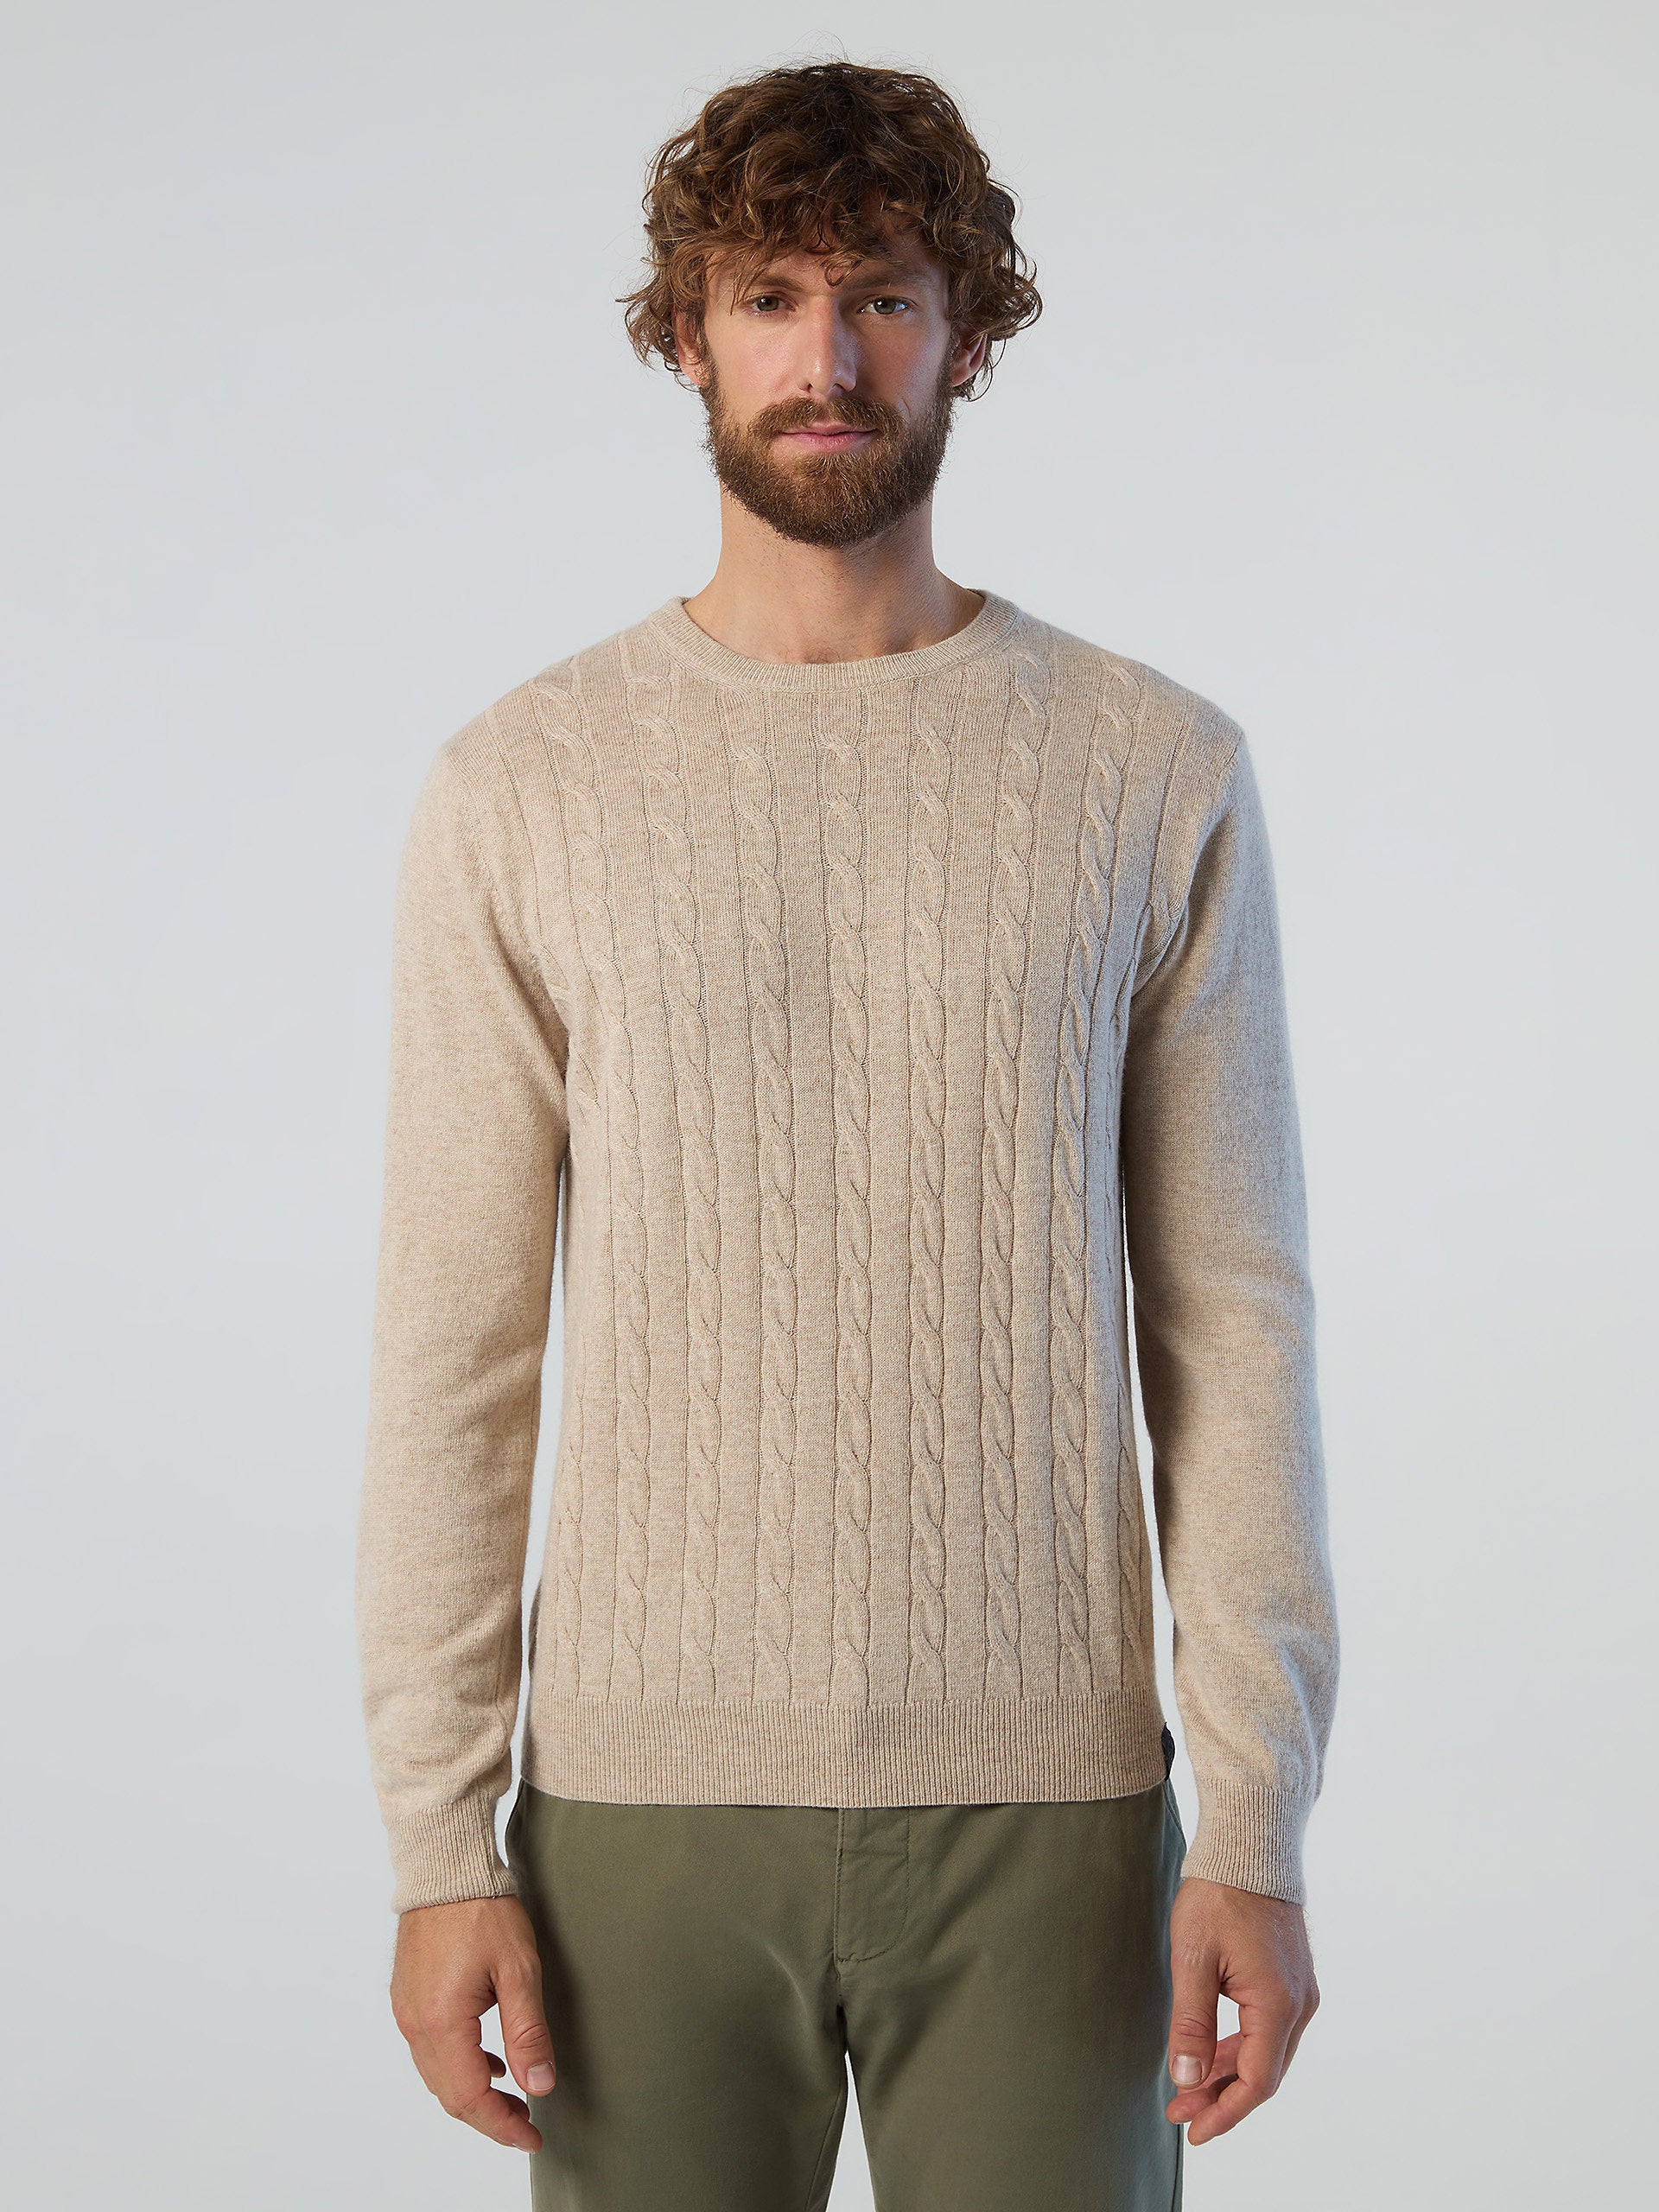 North Sails - Crew neck cable knitwearNorth SailsWinter seaL